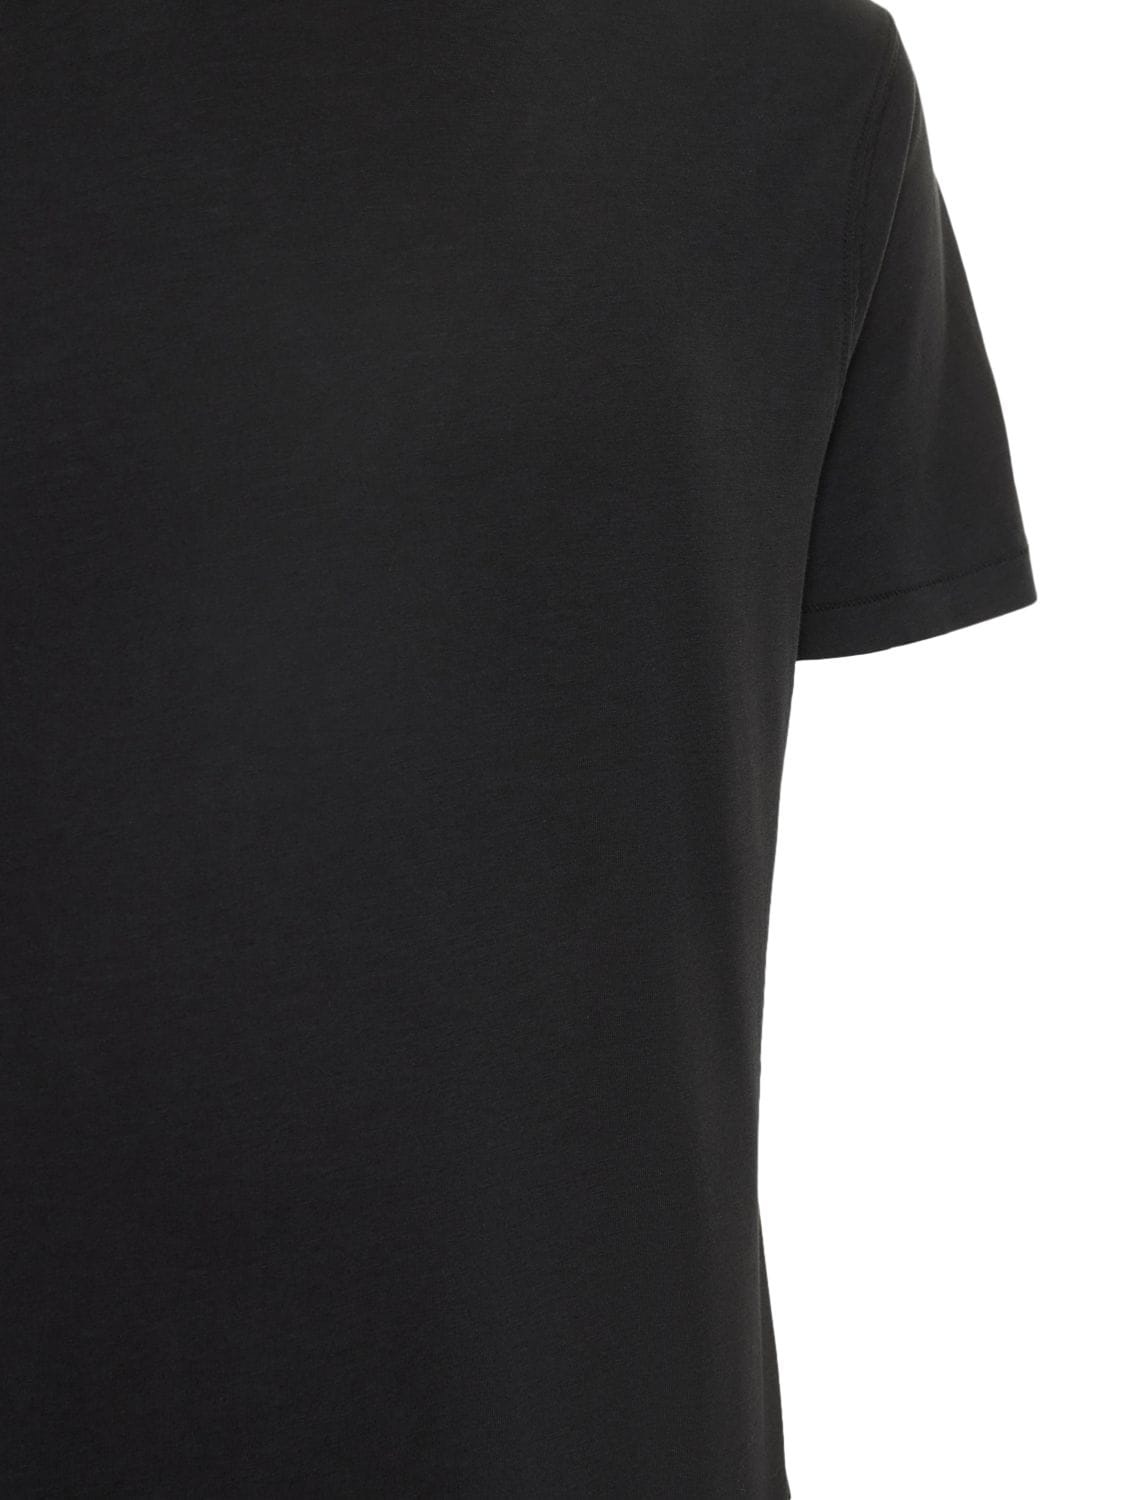 Shop Tom Ford Lyocell & Cotton S/s Crewneck T-shirt In Black